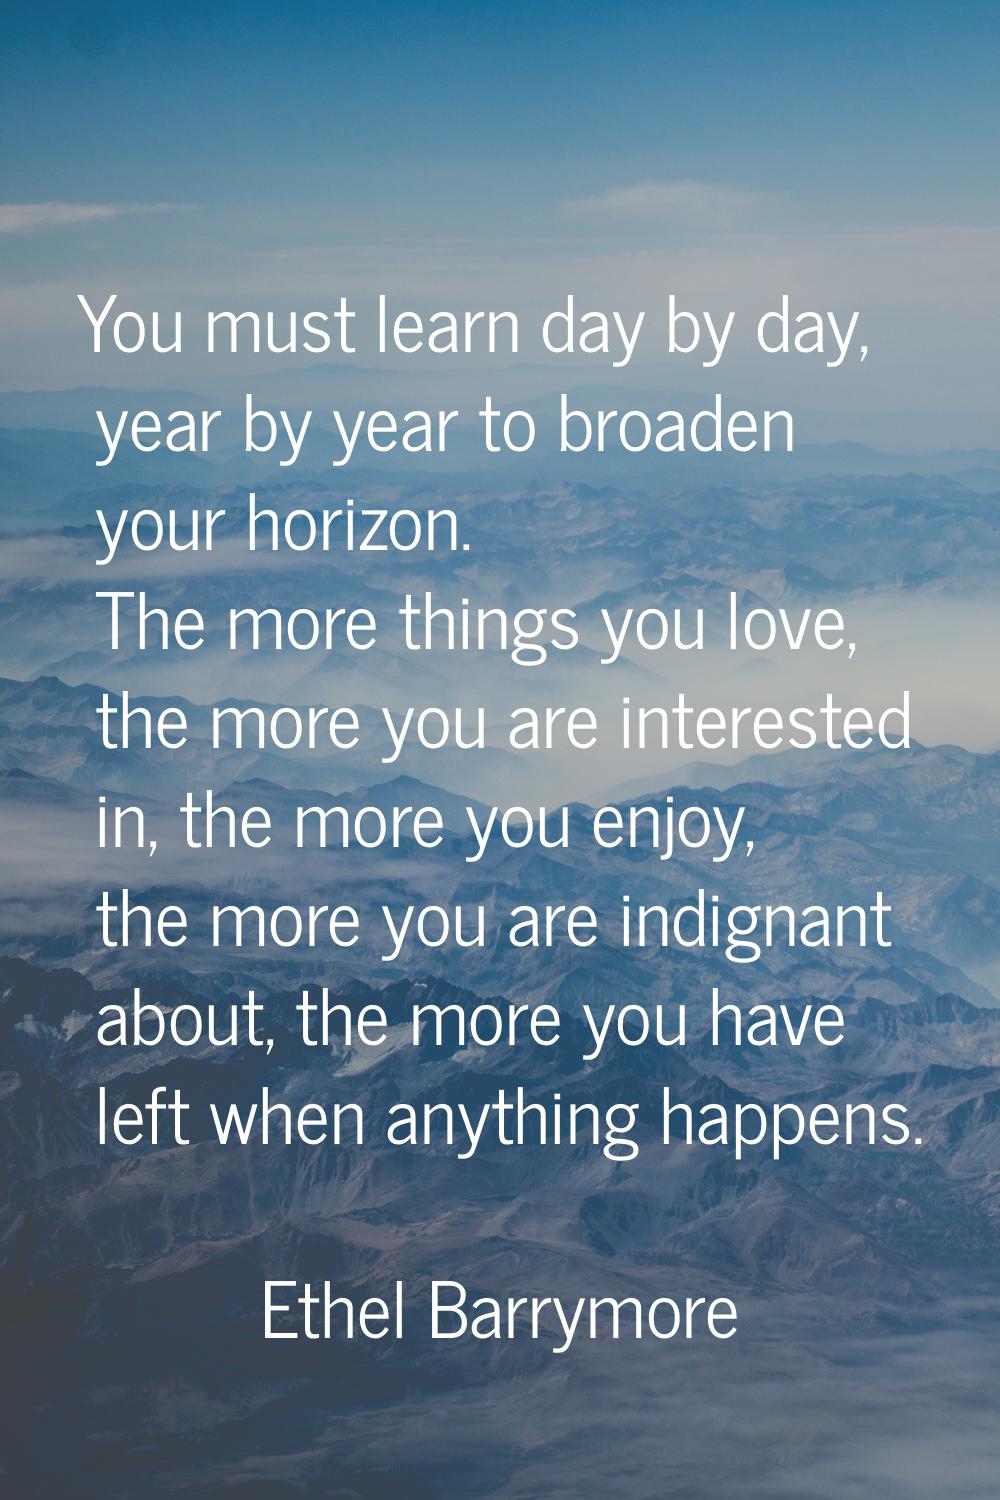 You must learn day by day, year by year to broaden your horizon. The more things you love, the more